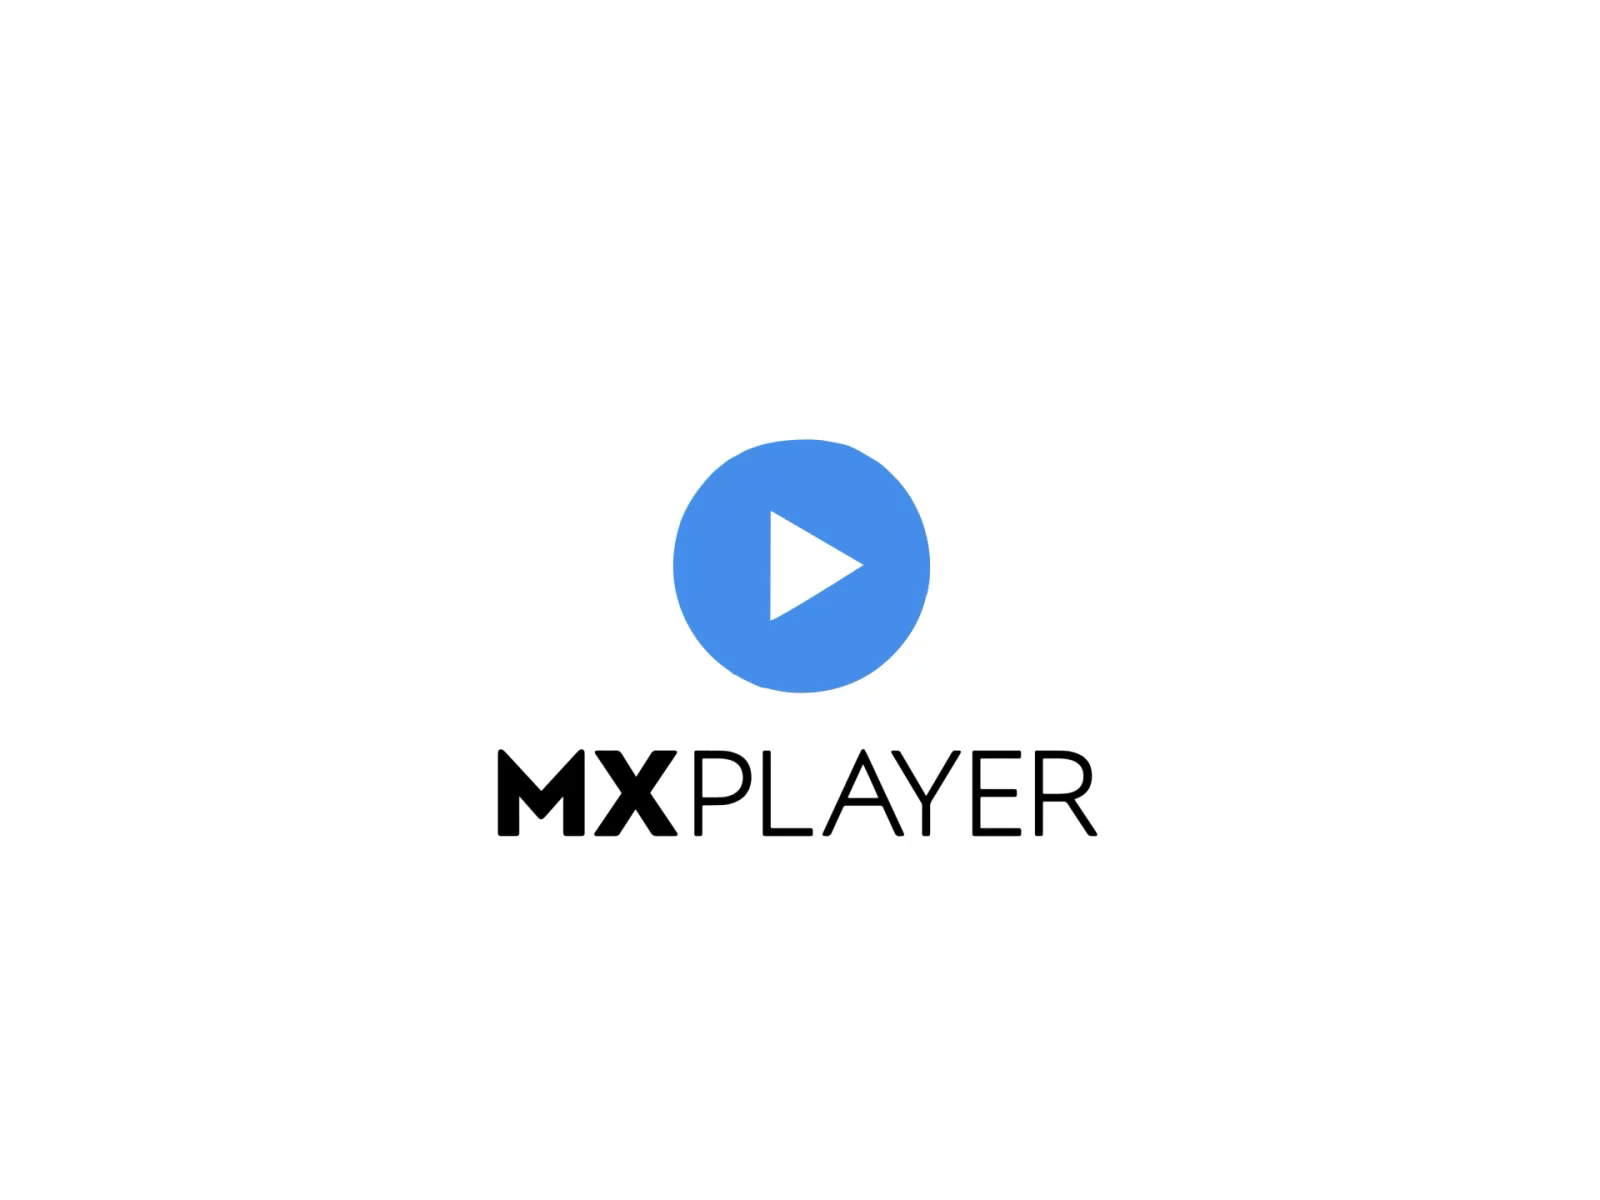 Mx Player Logo Animation 2danimation after effects animation branding design graphic design logo logo animation logo motion logoanimation motion graphics typography لوگو موشن لوگوموشن موشن گرافیک